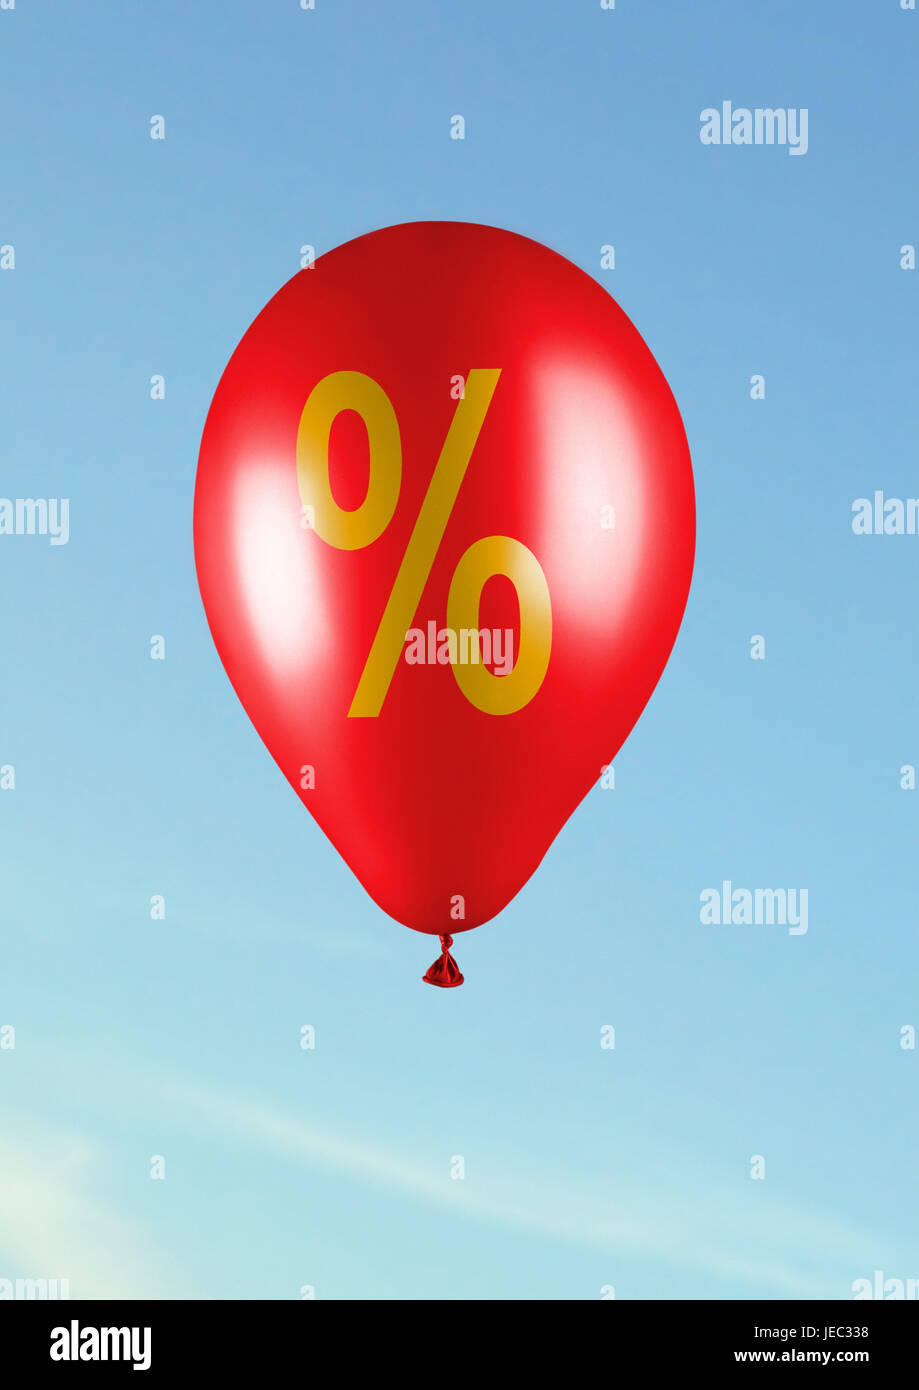 Balloon with percent sign, Stock Photo